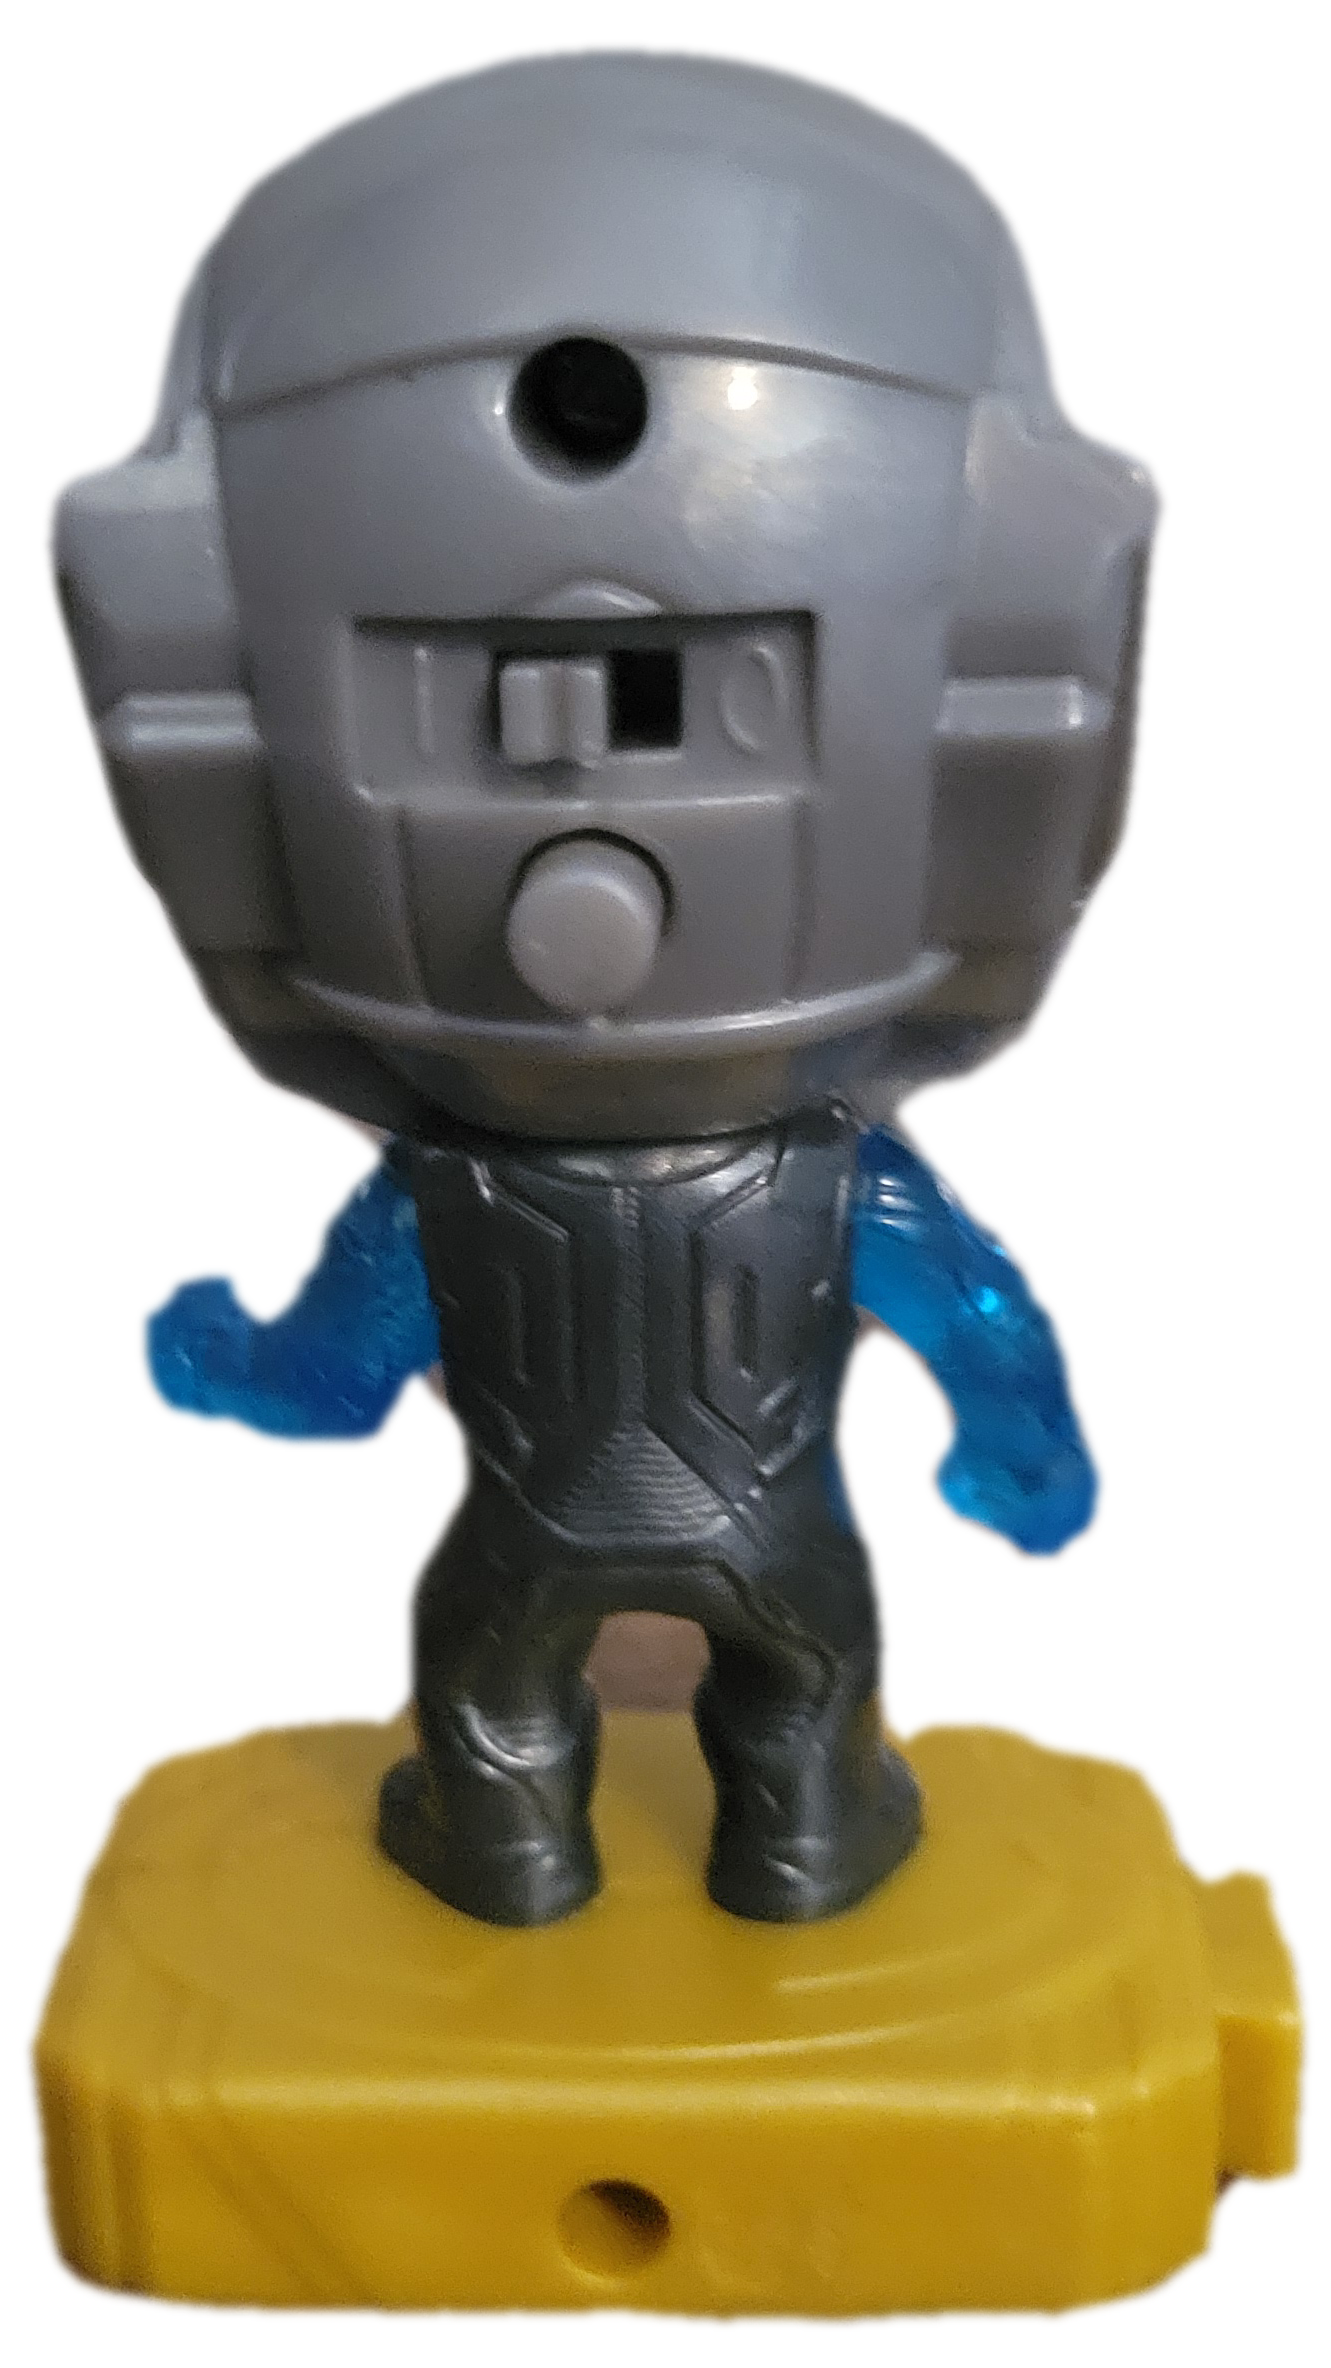 McDonalds Marvel Studios Heroes Avengers End Game Ant Man Happy Meal Toy